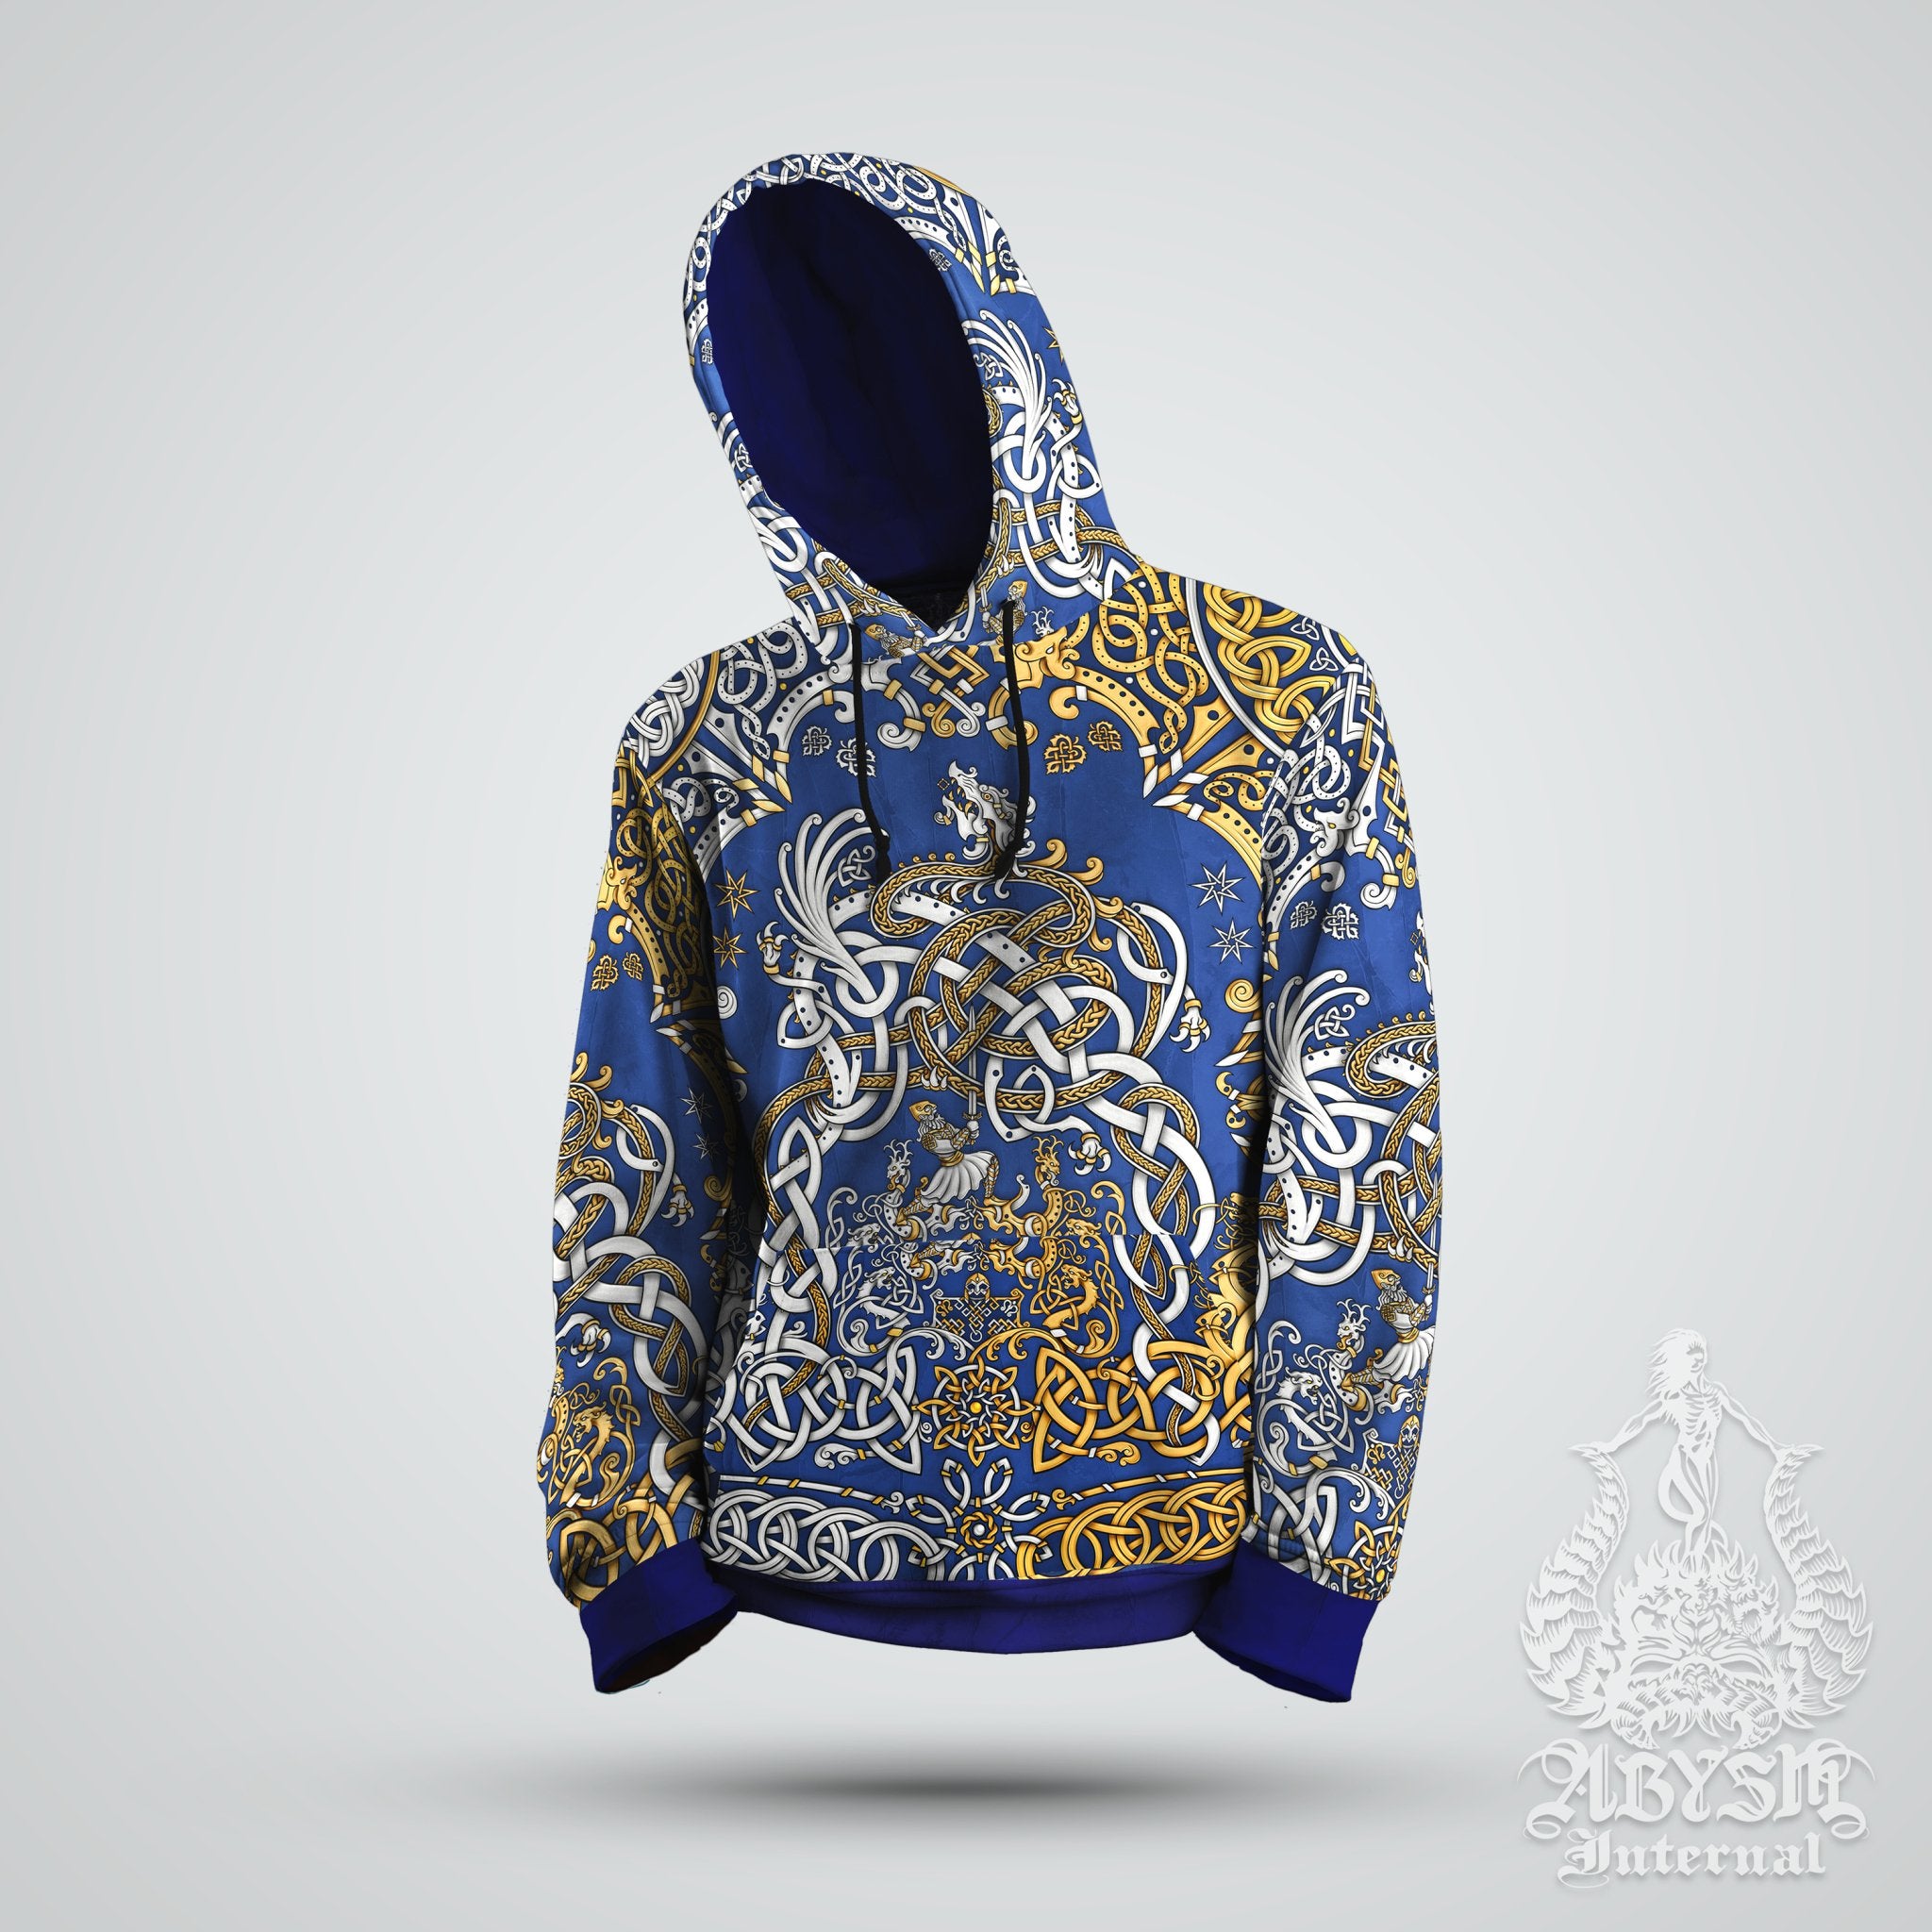 Viking Sweater, Nordic Dragon Pullover, Norse Art Hoodie, Fantasy Street Outfit, Gold Fafnir Streetwear, Alternative Clothing, Unisex - Black, Blue or Red, 3 Colors - Abysm Internal